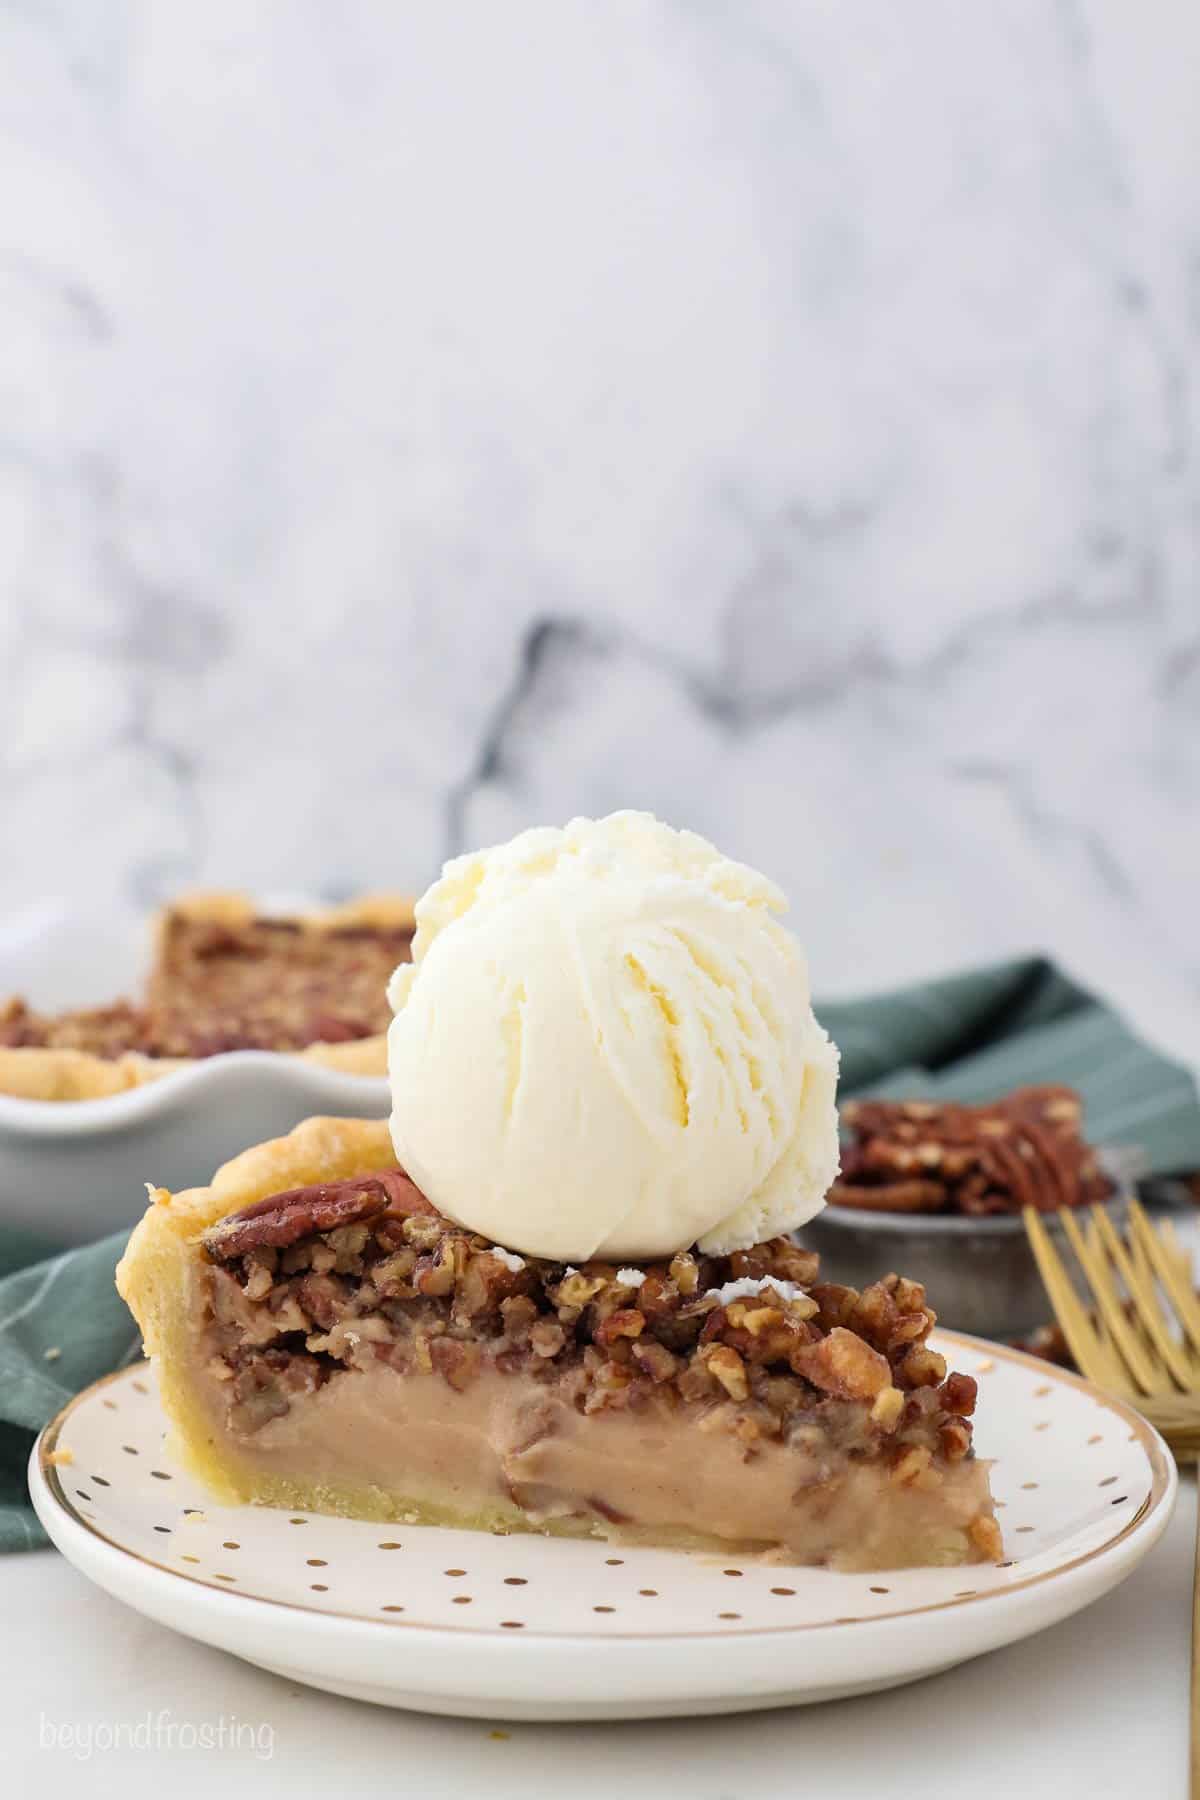 A slice of homemade pecan pie with a large scoop of ice cream on top